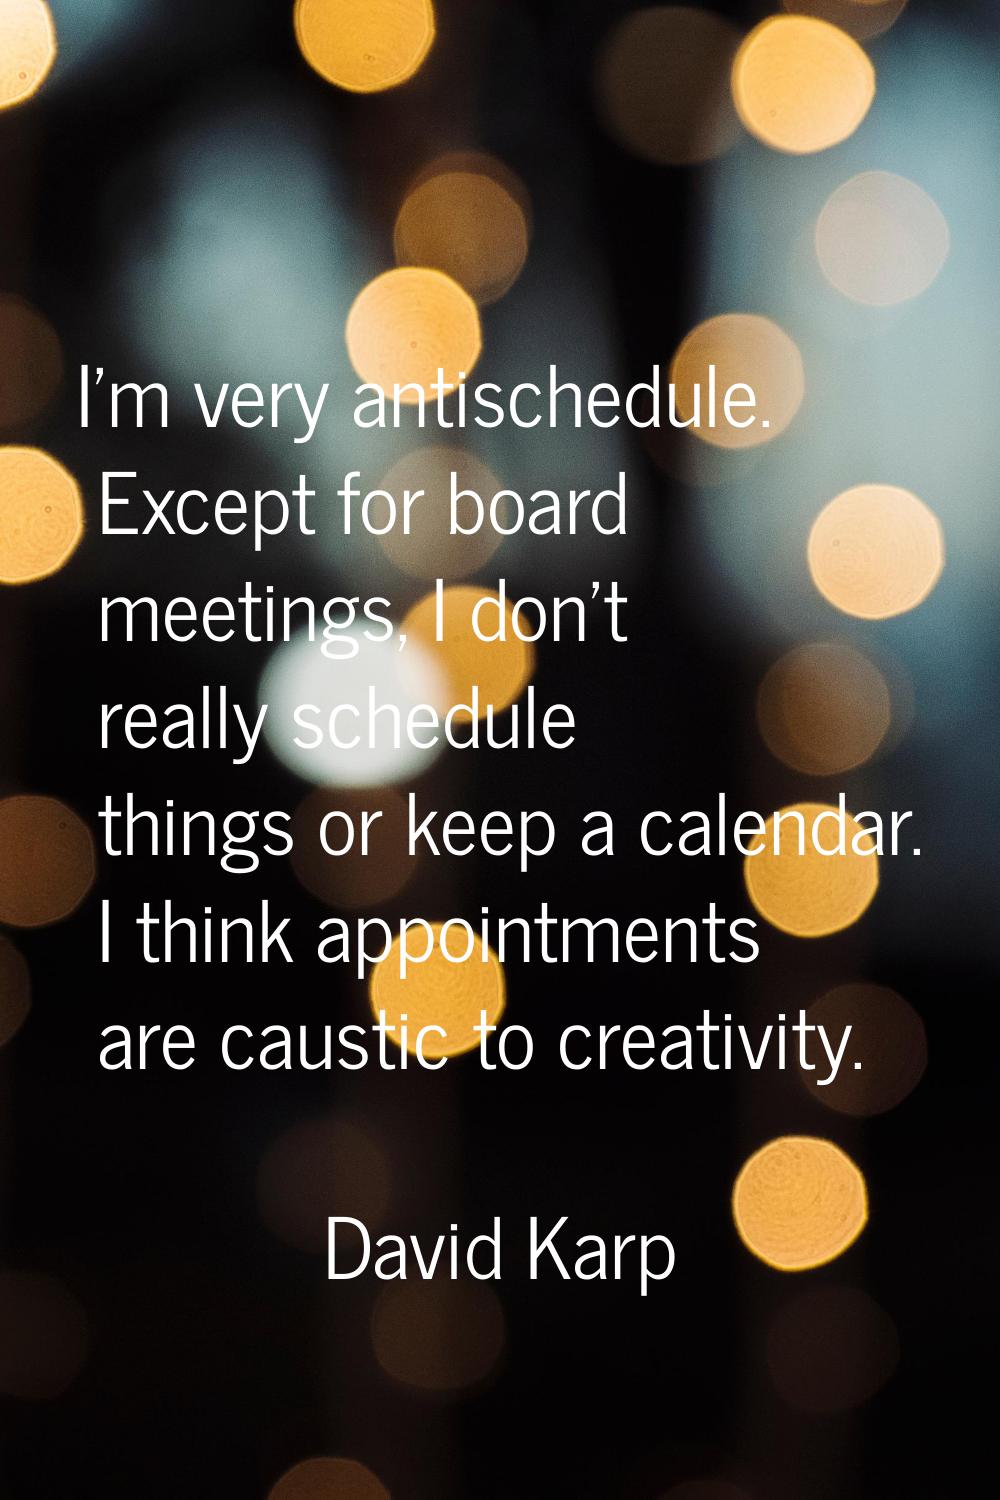 I'm very antischedule. Except for board meetings, I don't really schedule things or keep a calendar